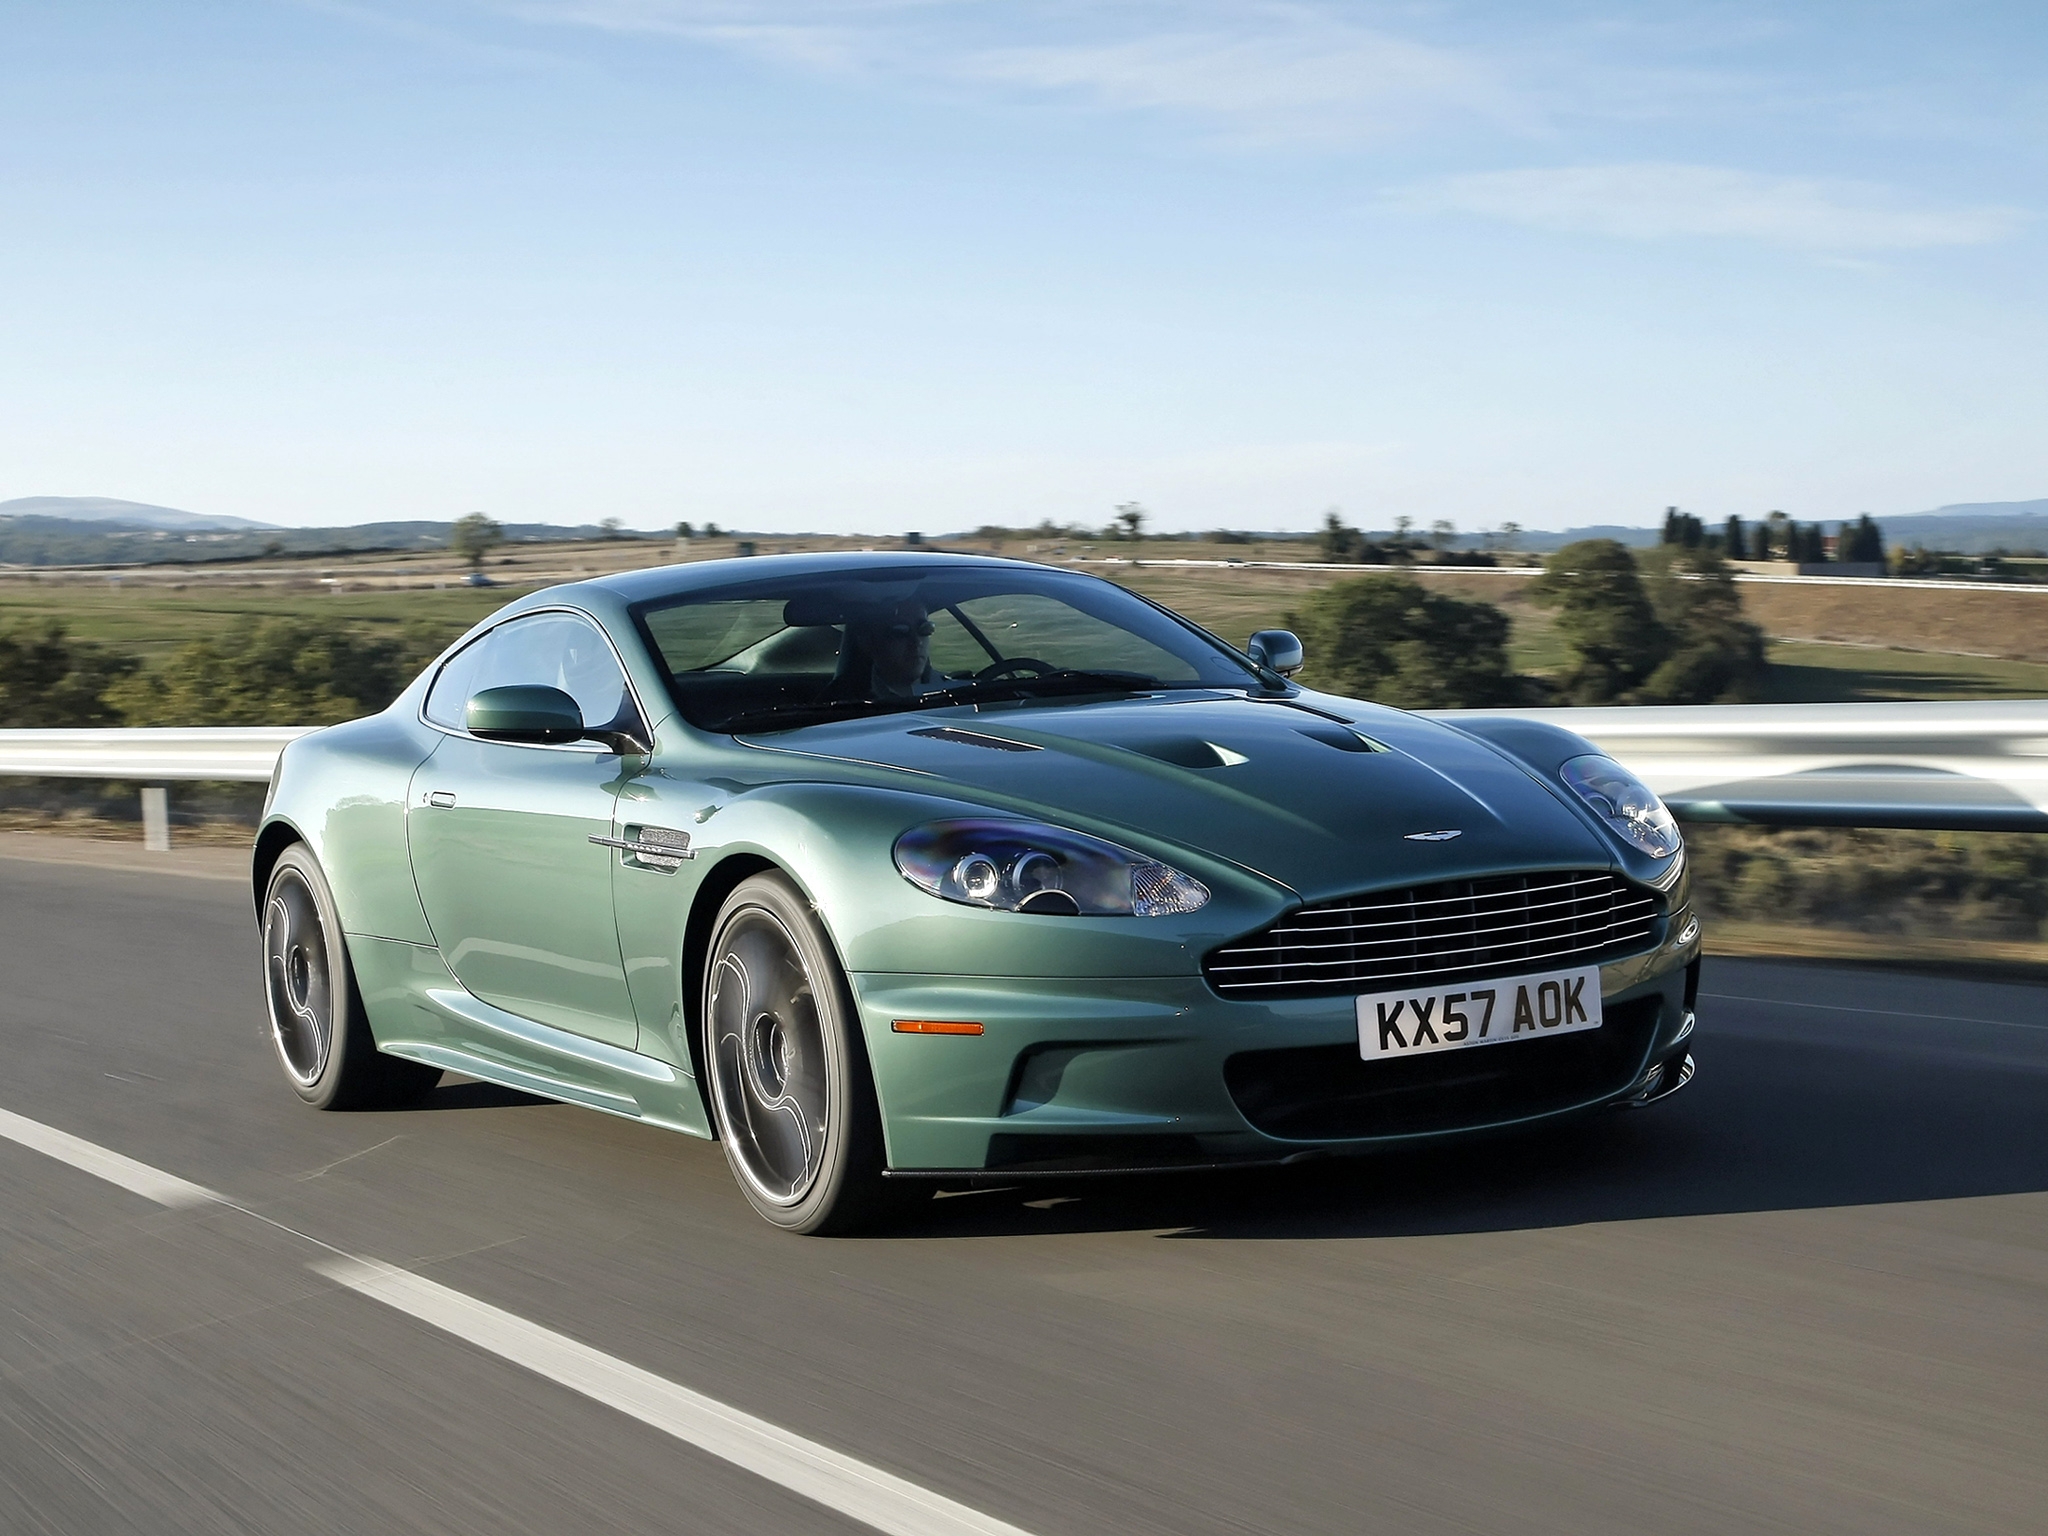 Windows Backgrounds cars, aston martin, auto, green, front view, speed, dbs, 2008